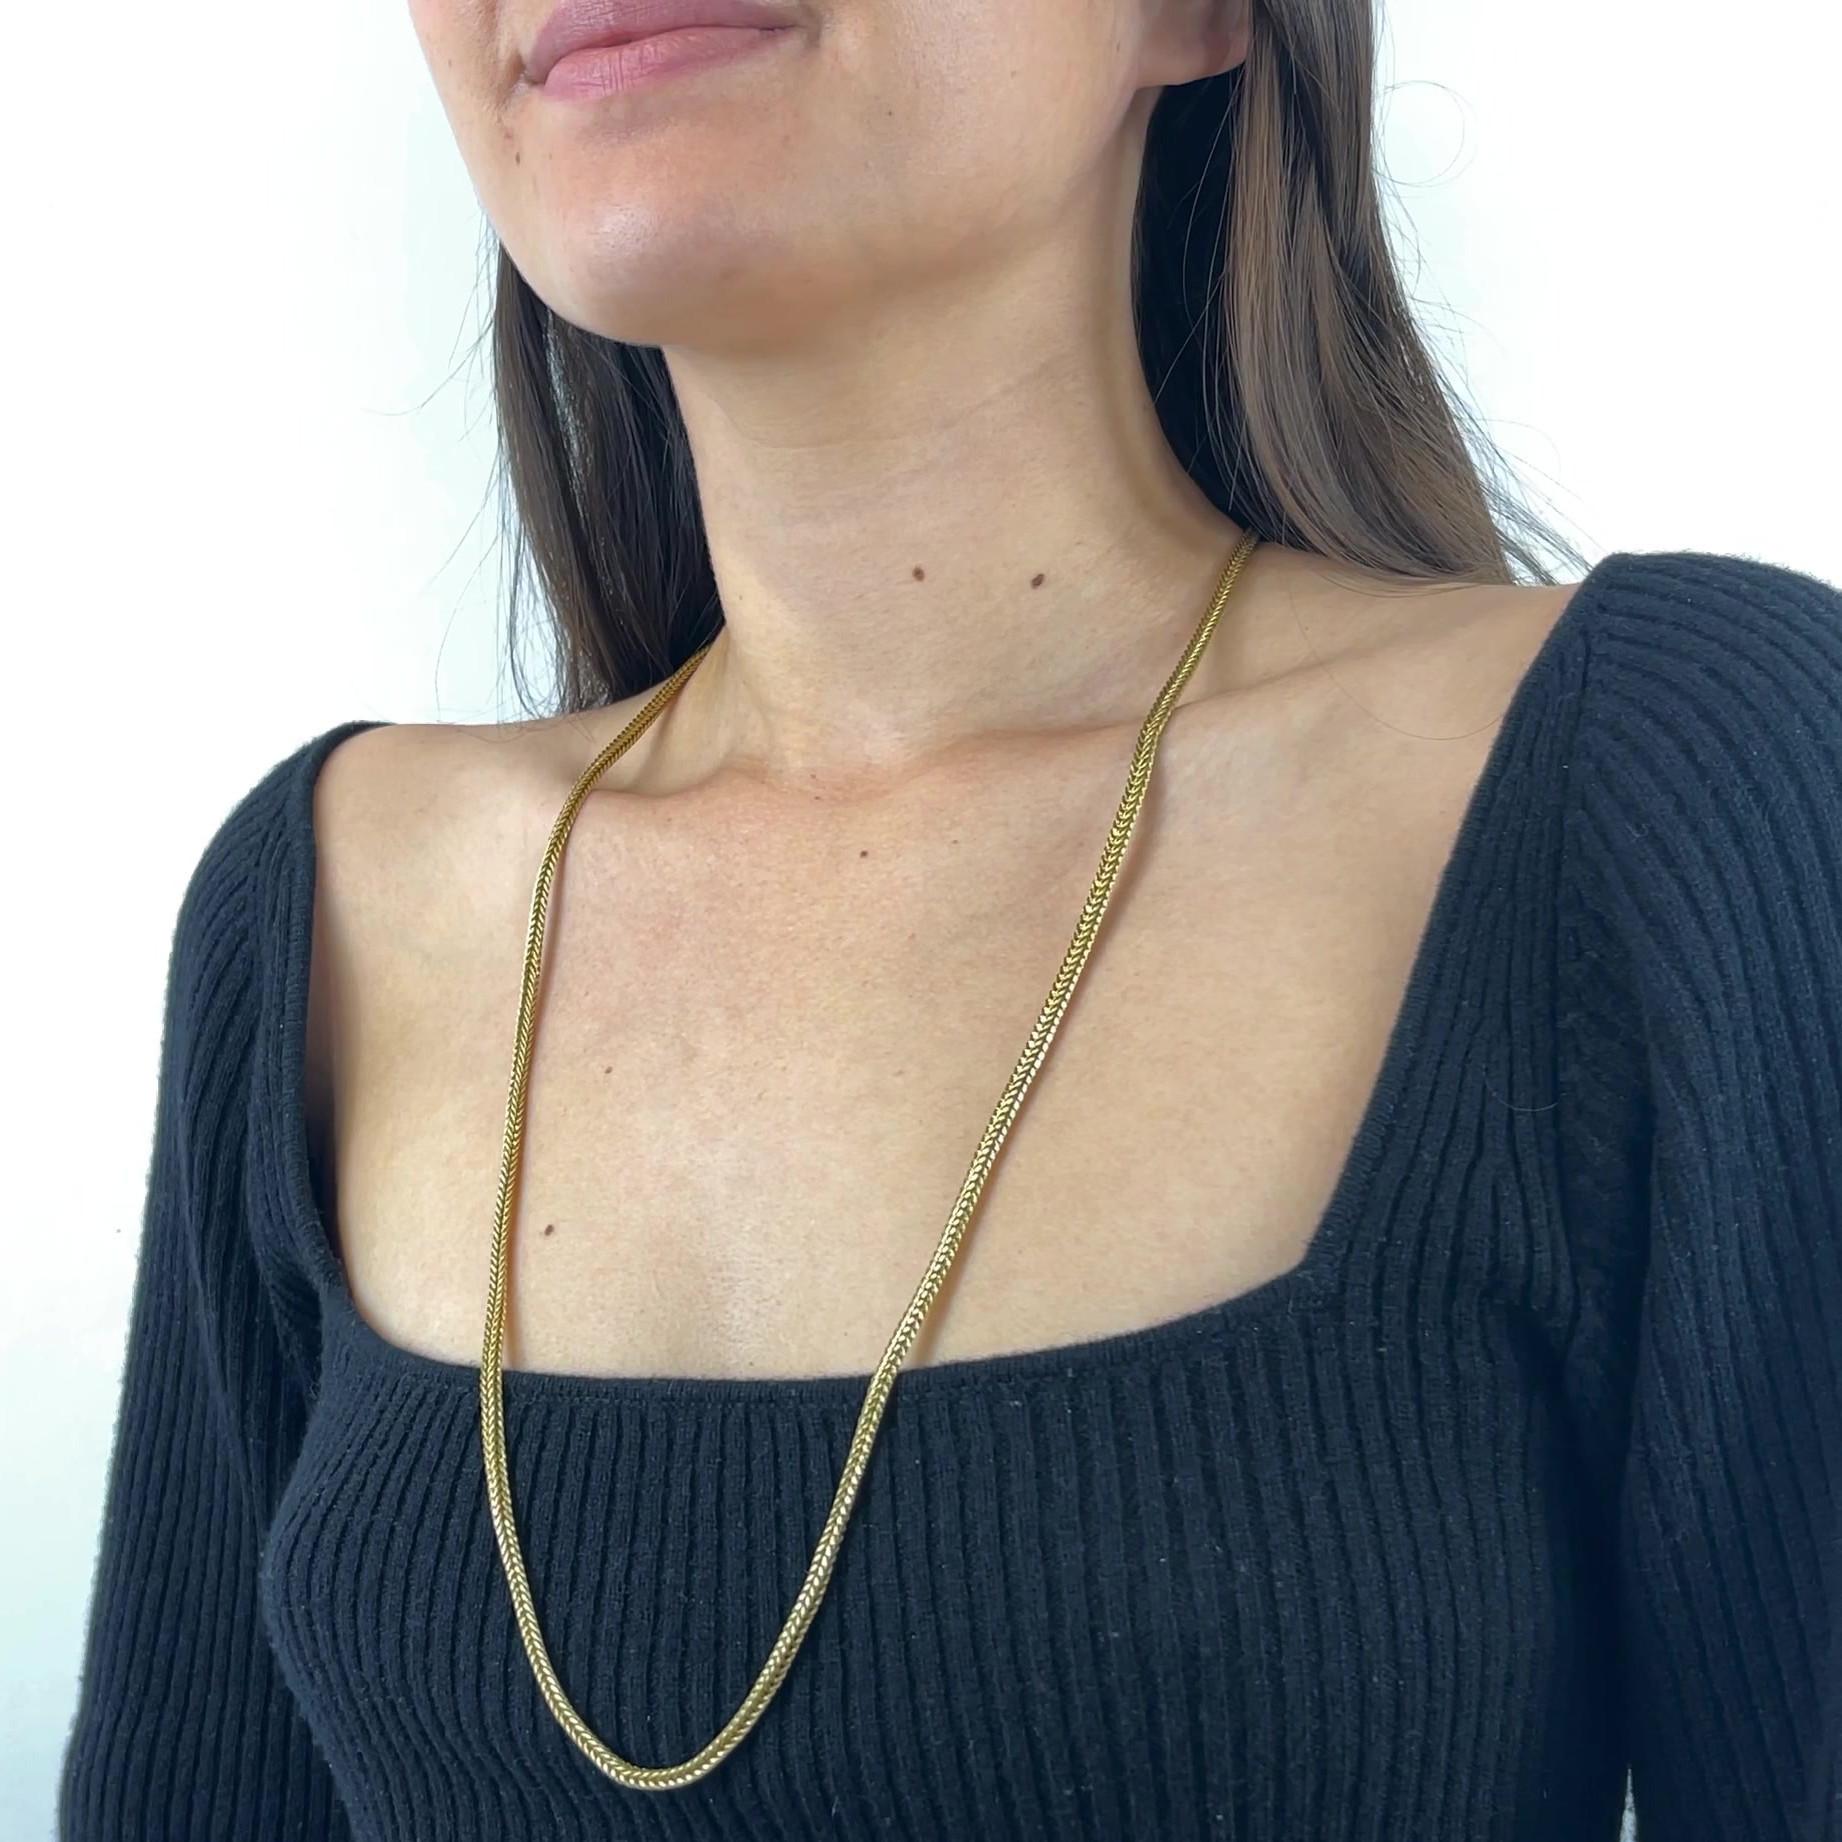 One Vintage 31 Inch French 18 Karat Gold Wheat Chain. Crafted in 18 karat yellow gold, with French hallmarks. Circa 1970s. The necklace measures 31 inches in length. 

About The Piece: True estate jewelry lovers are on a hunt for these long chain